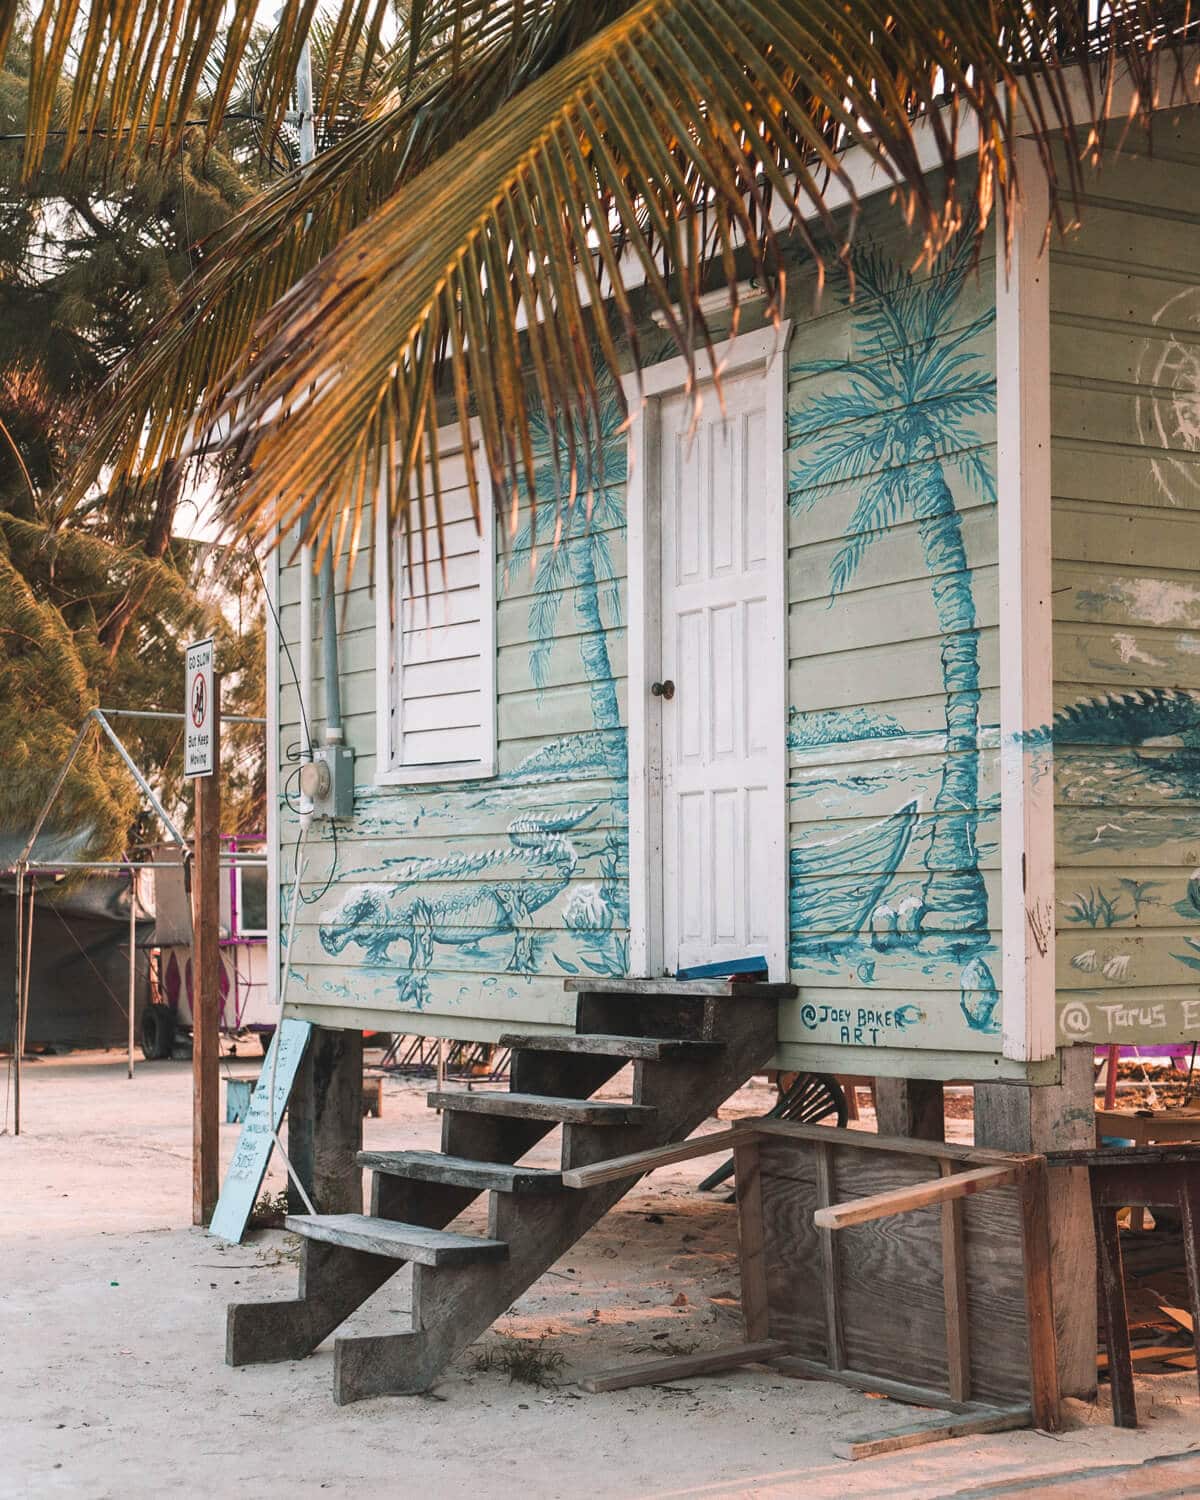 21 Photos to Inspire You to Travel to Caye Caulker, Belize | Caye Caulker island | Visit Caye Caulker | Caye Caulker travel tips | Belize photos | Belize travel inspiration | Where to go in Belize | What to do in Belize | What to do in Caye Caulker 